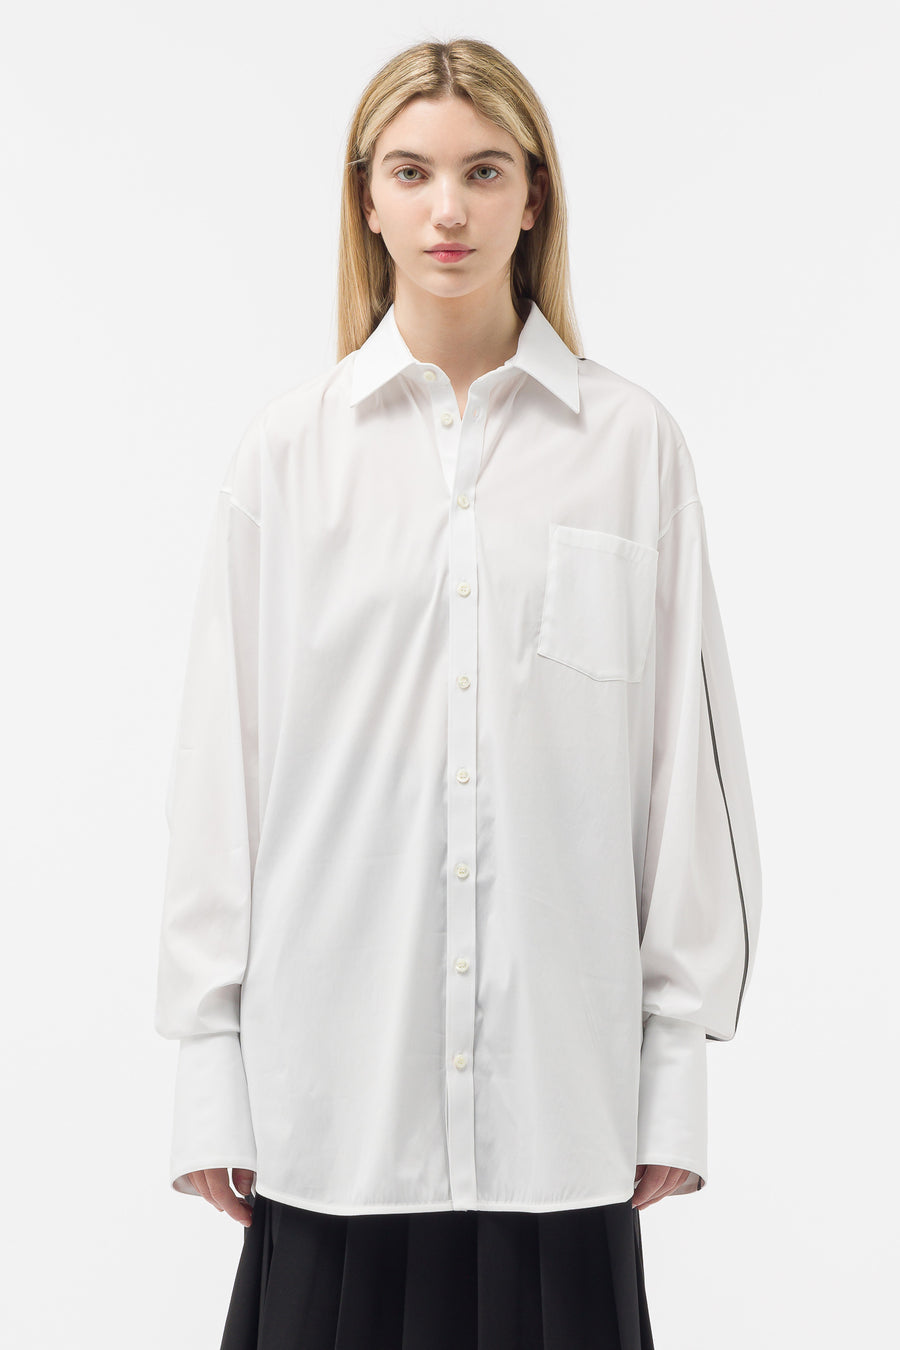 Peter Do - Peter Shirt in White